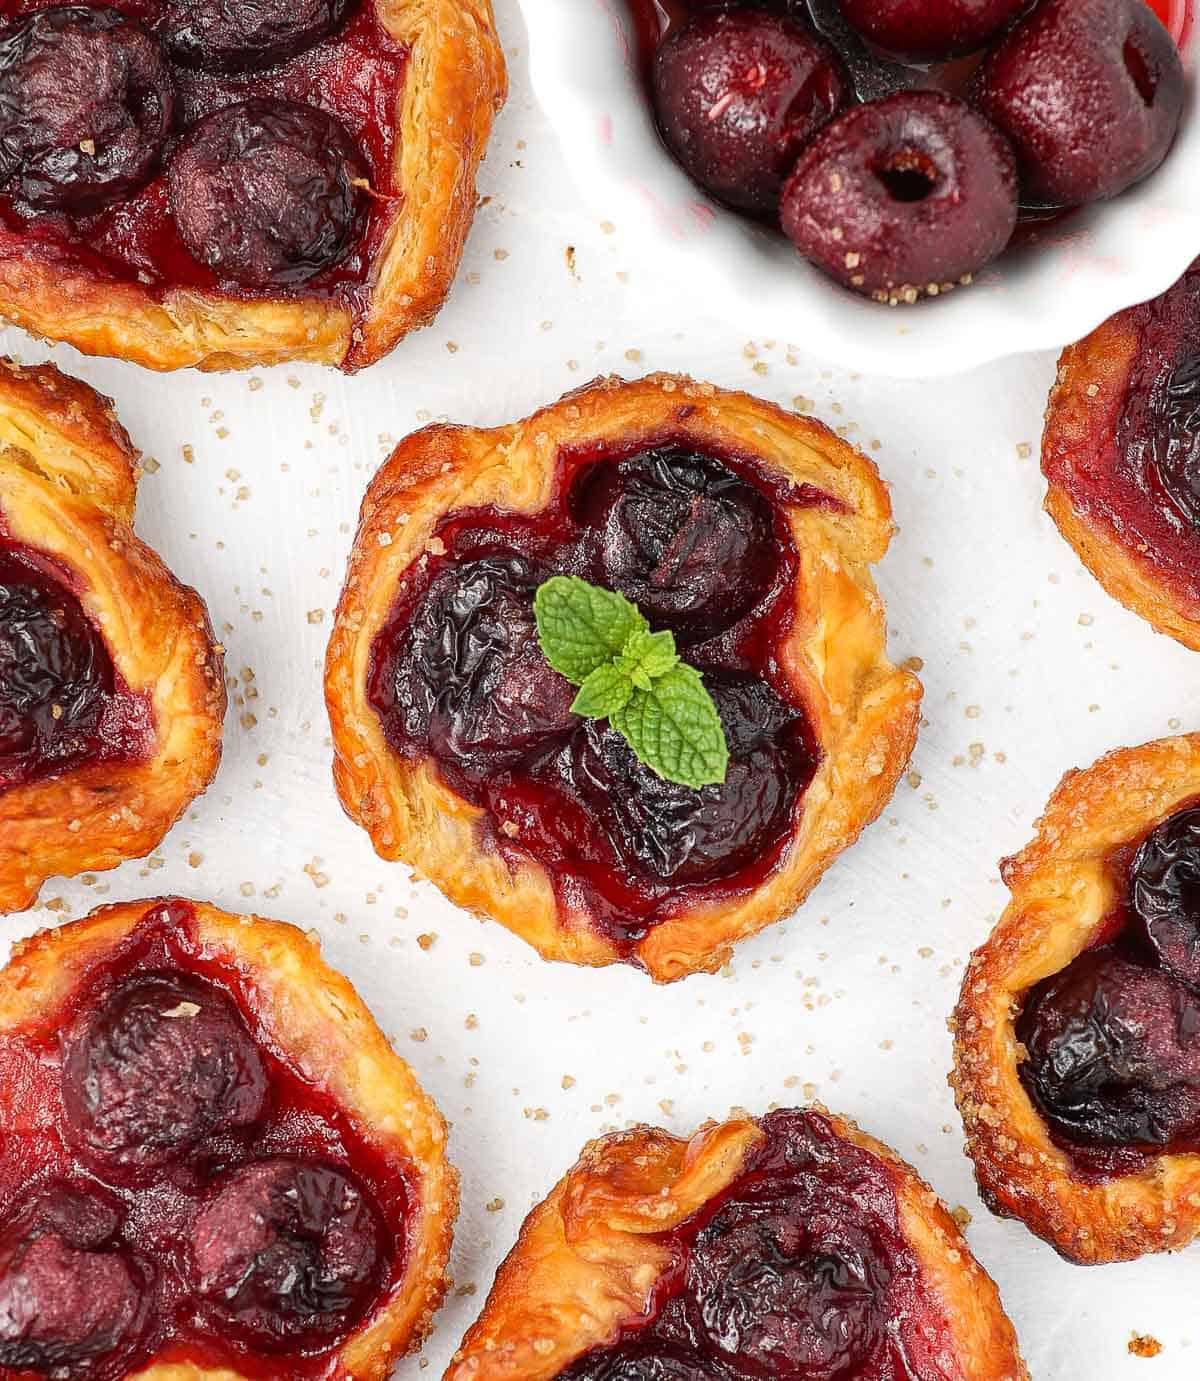 Baked tartlets seen from above on a white surface.